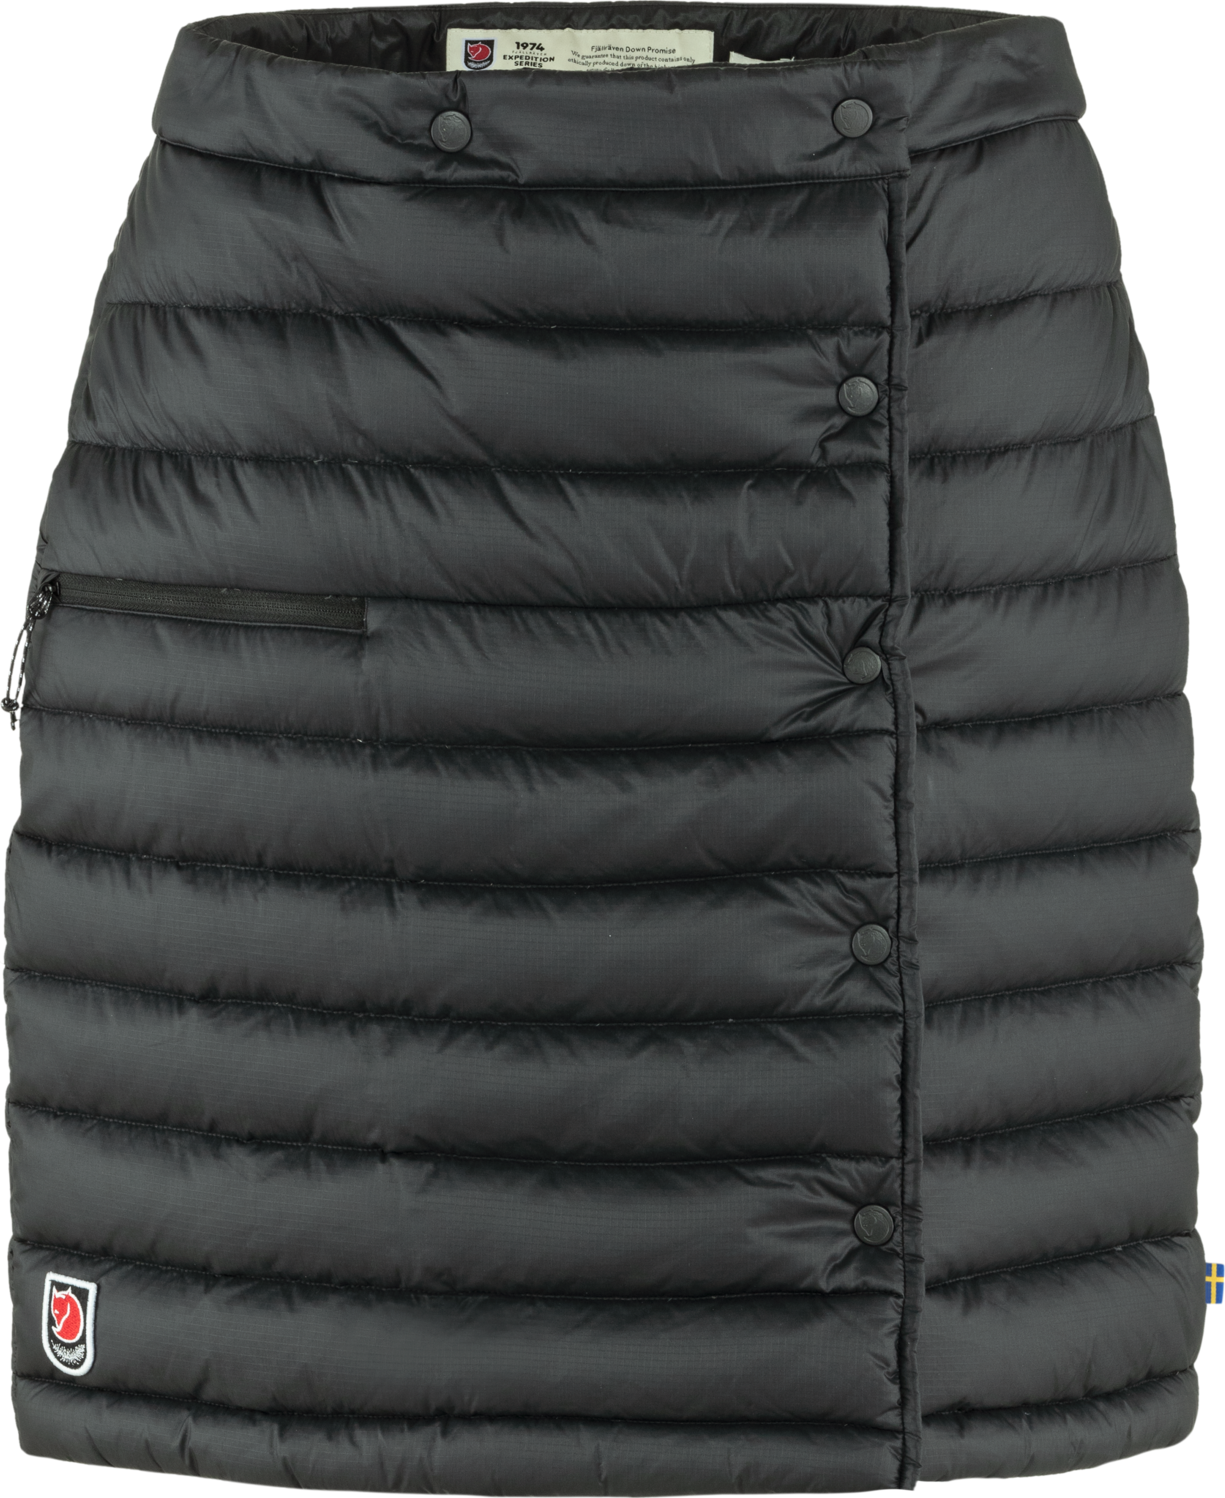 Women’s Expedition Pack Down Skirt Black